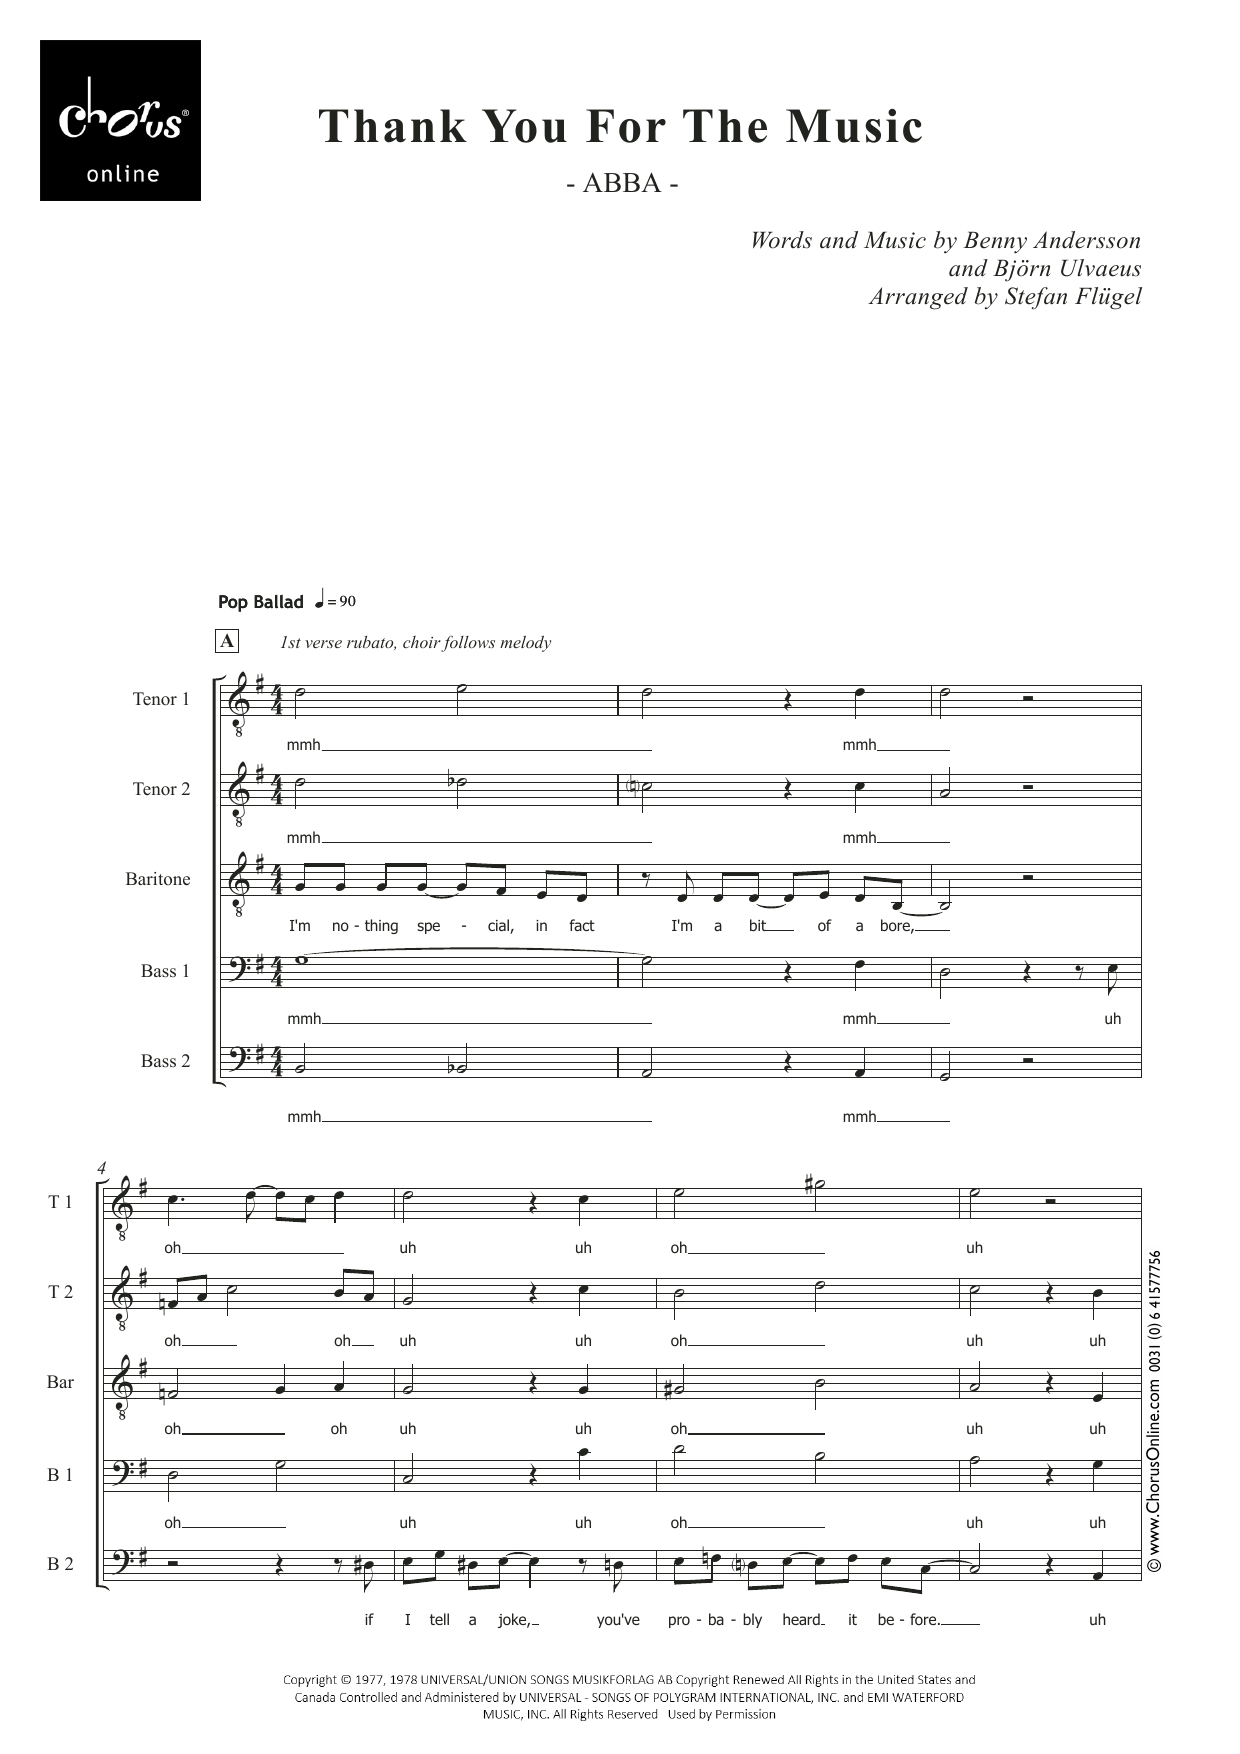 ABBA Thank You for the Music (arr. Stefan Flügel) sheet music notes printable PDF score